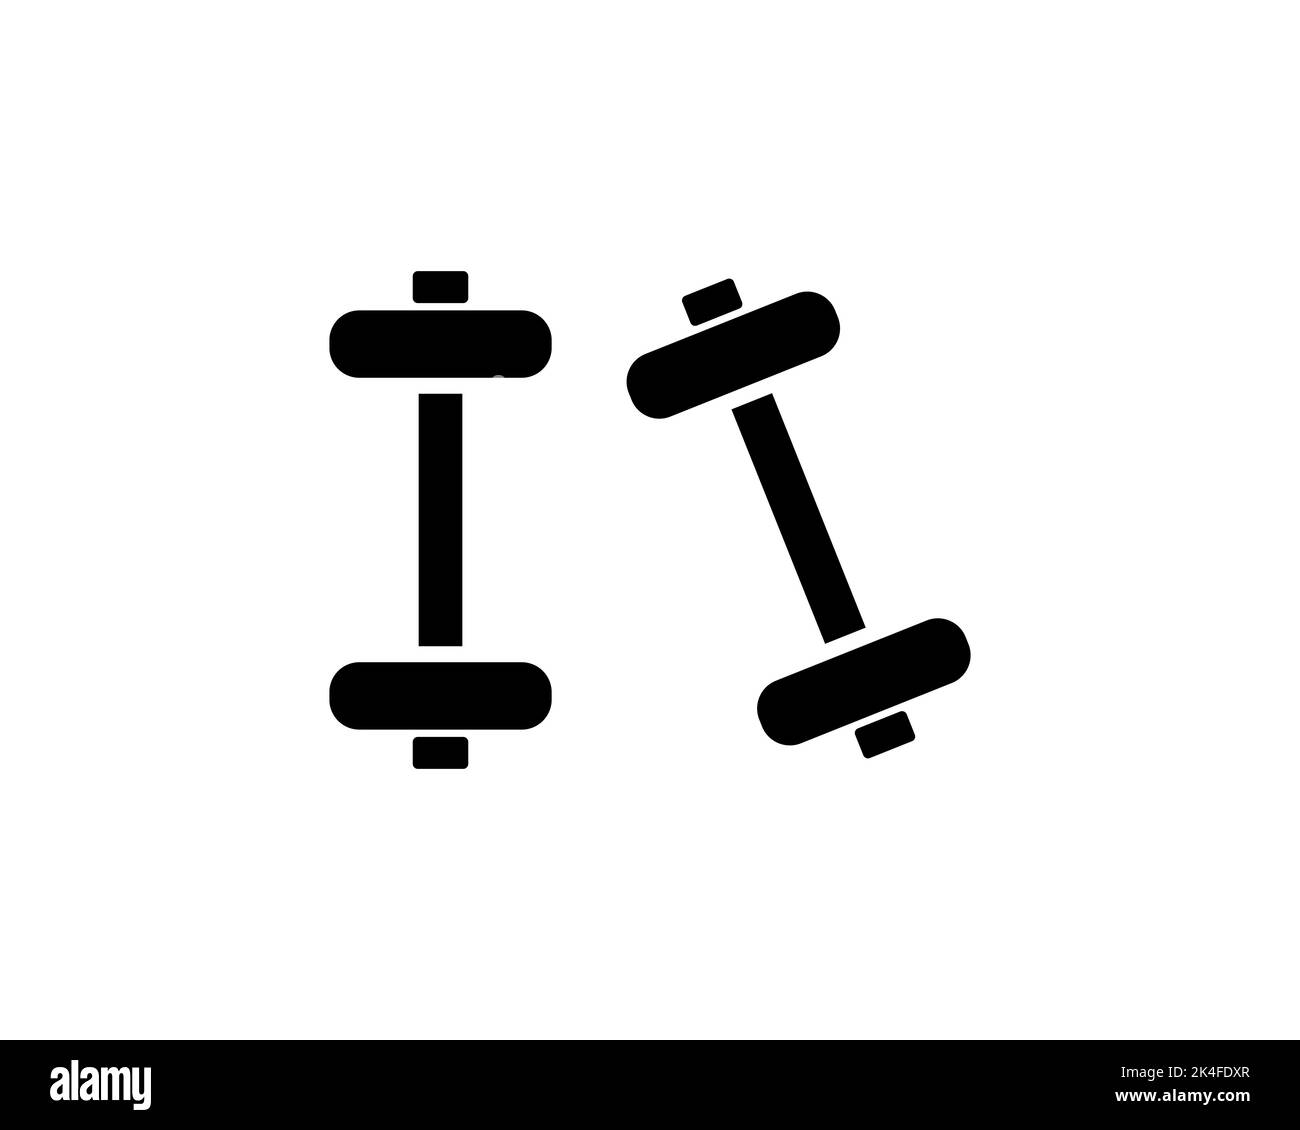 dumbbell health weight lifting icon vector symbol design illustration Stock Vector